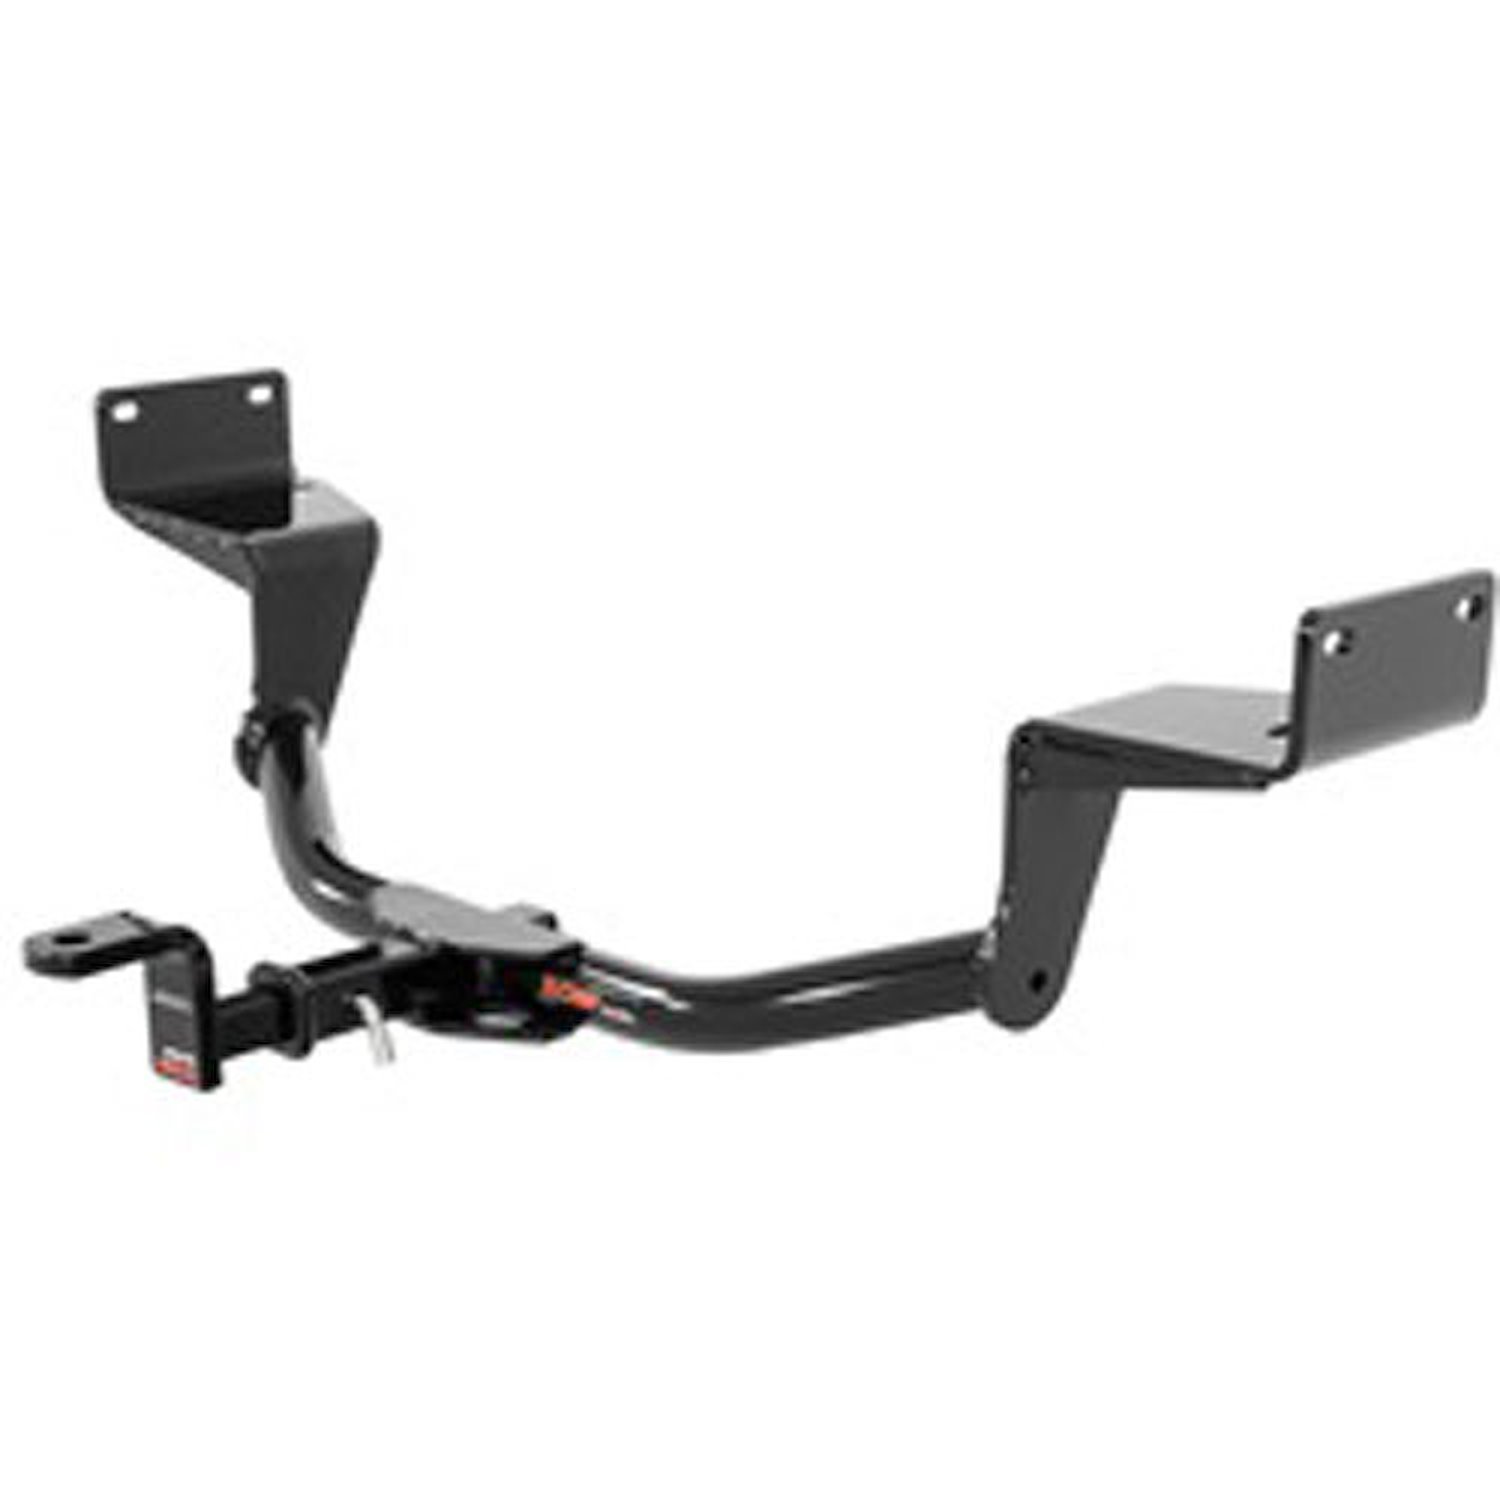 Class 1 Trailer Hitch 2015.0 - 2015.0 Ford Mustang Coupe